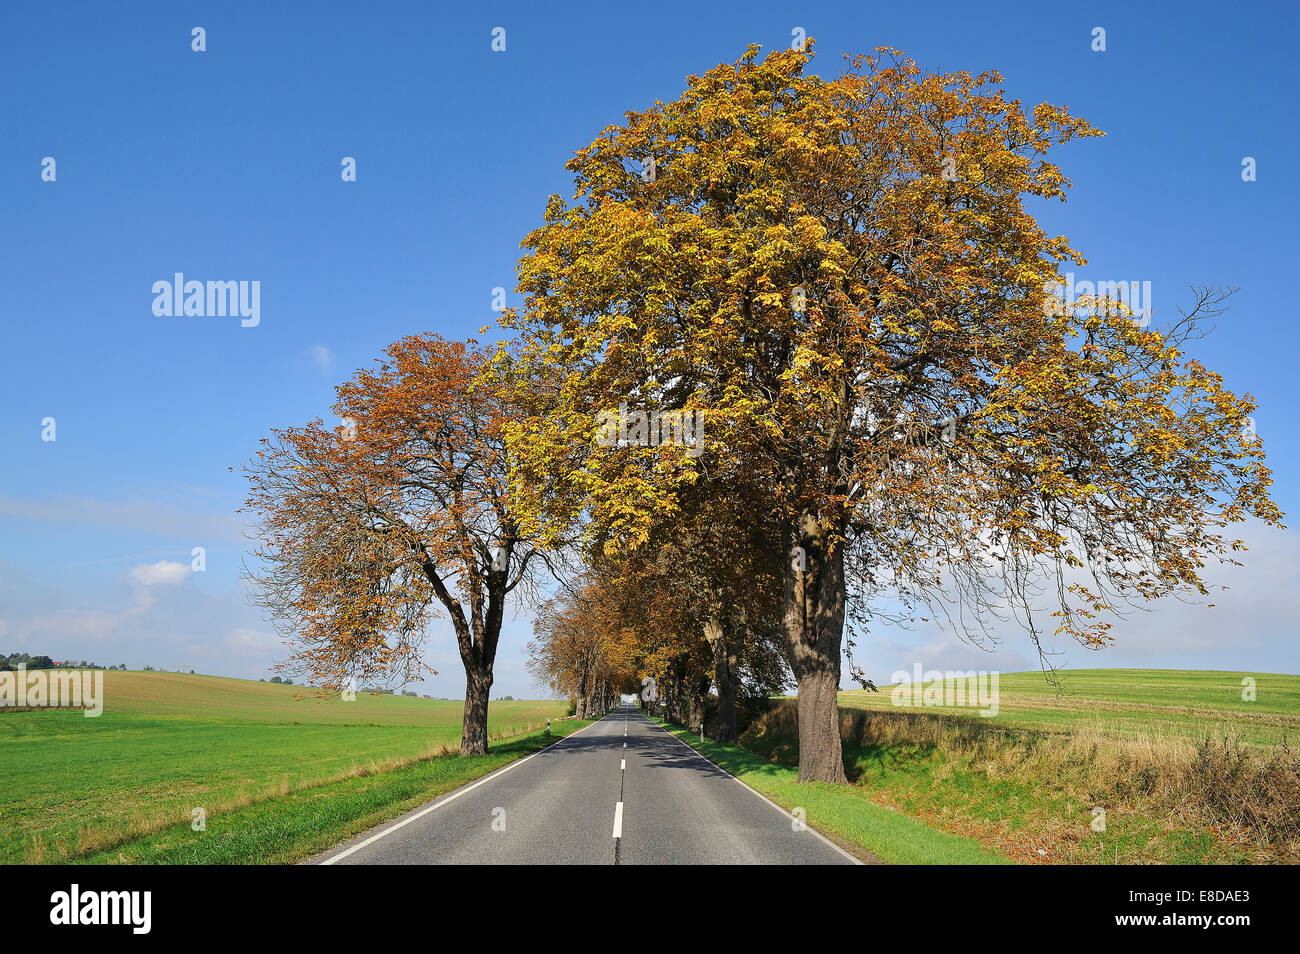 Country road with autumnal Horse-chestnut avenue (Aesculus hippocastanum), Rhena, Mecklenburg-Vorpommern, Germany Stock Photo